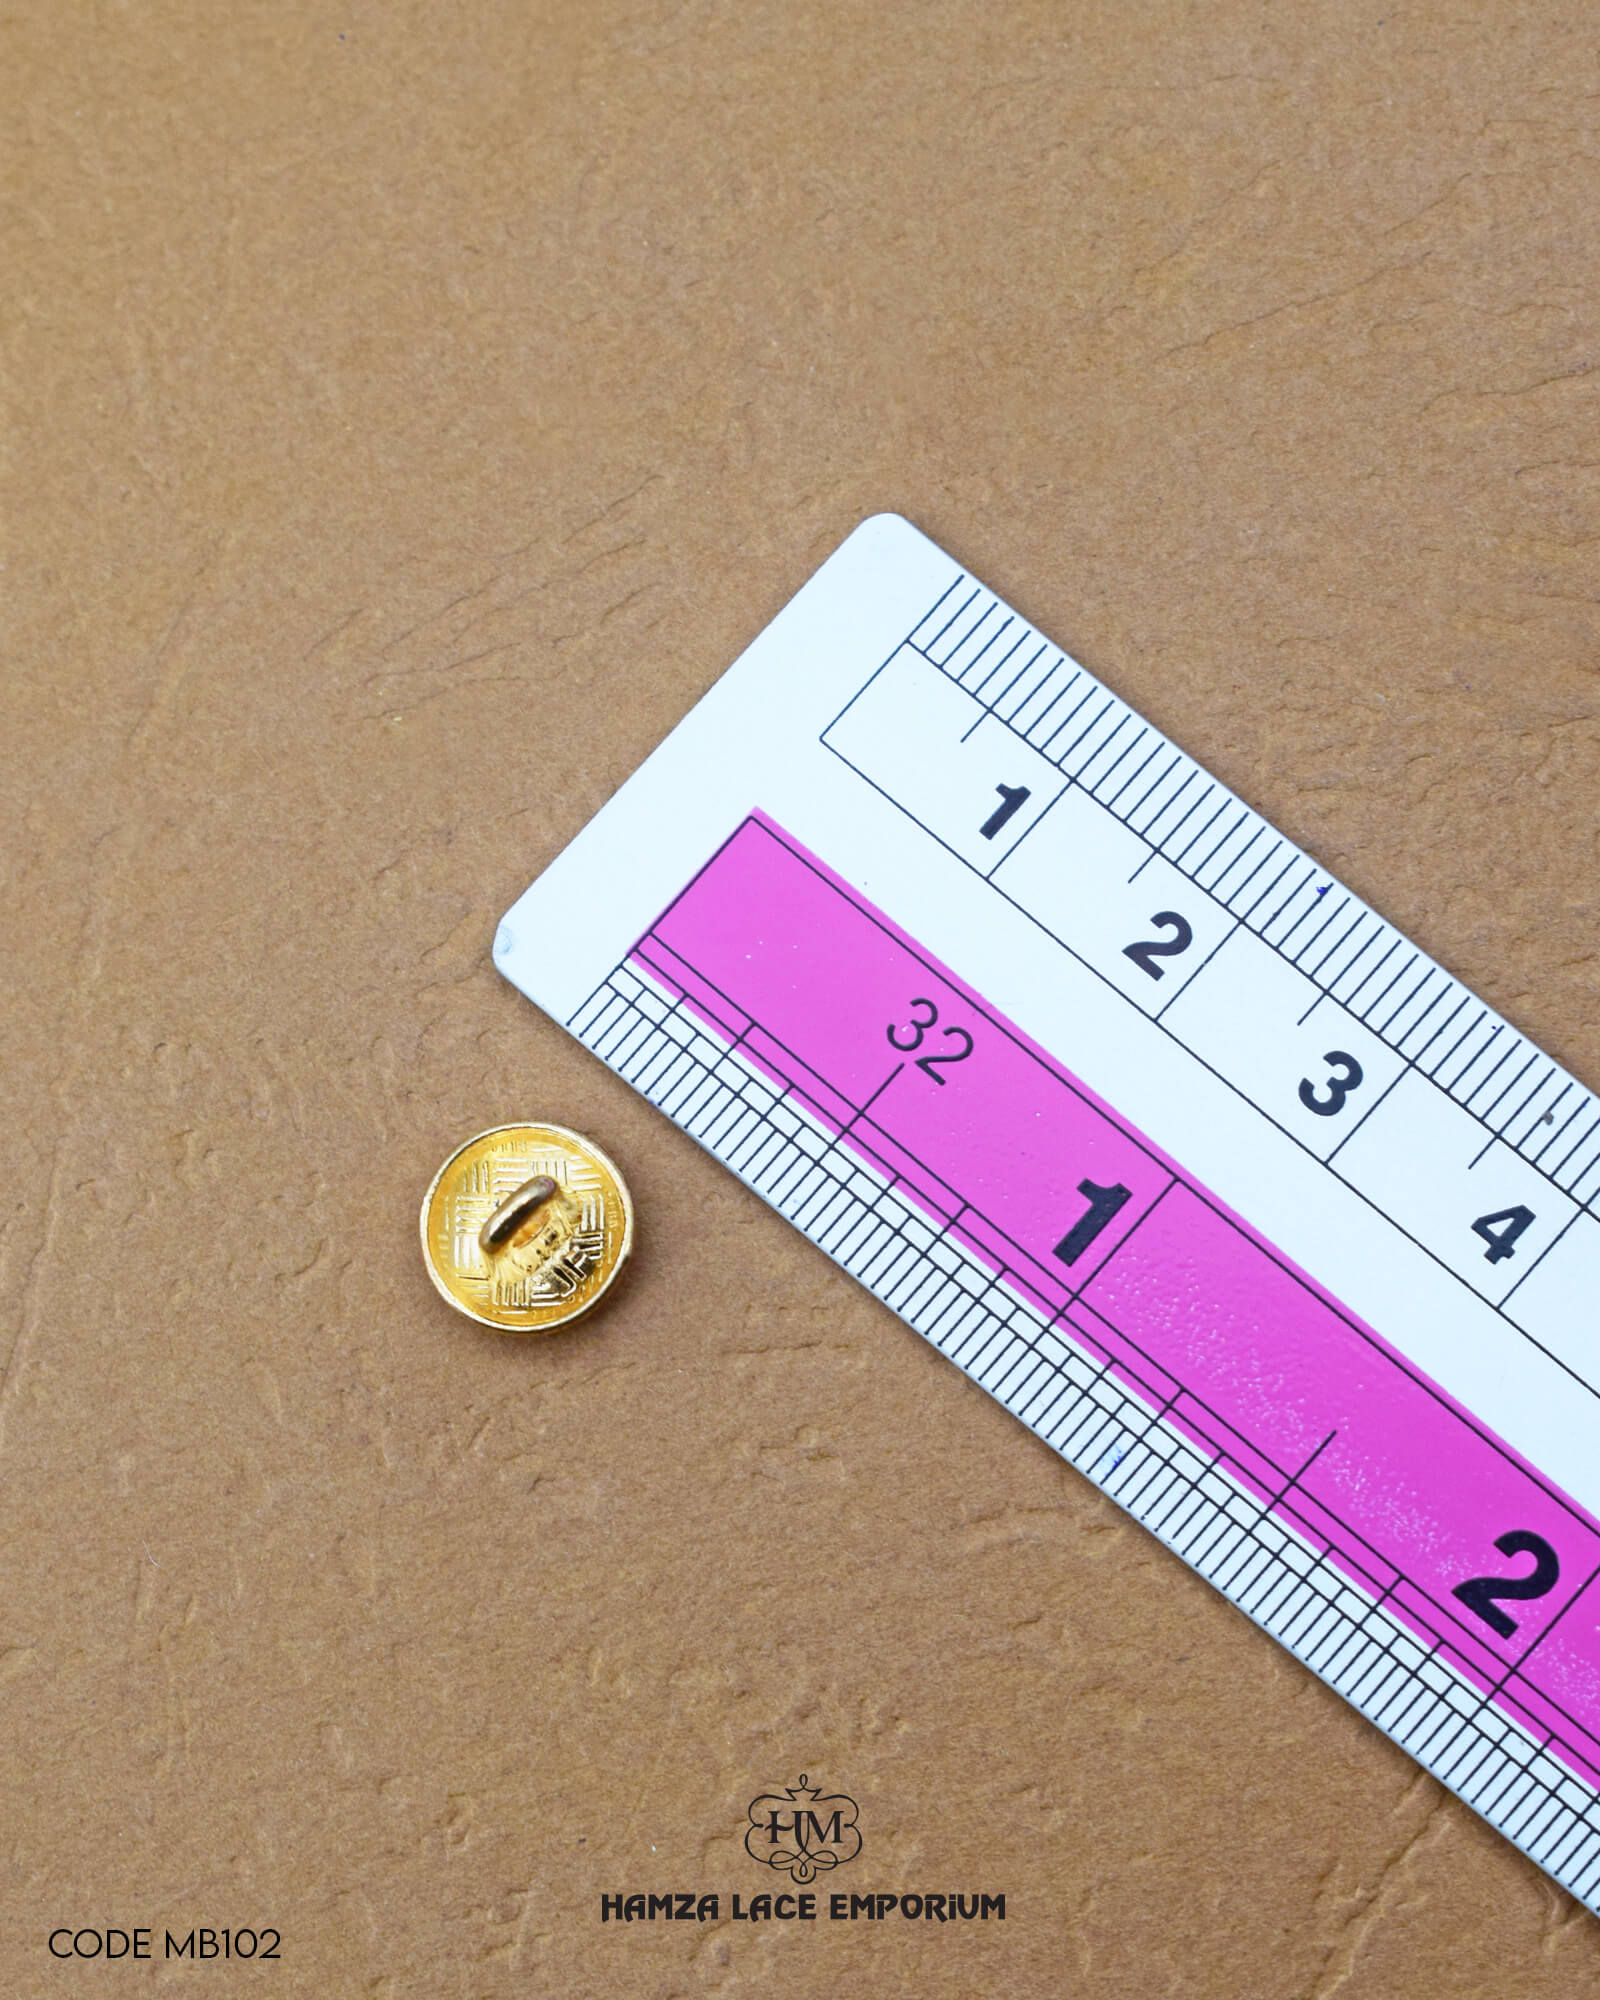 Size of the 'Metal Suiting Button MB102' is given with the help of a ruler